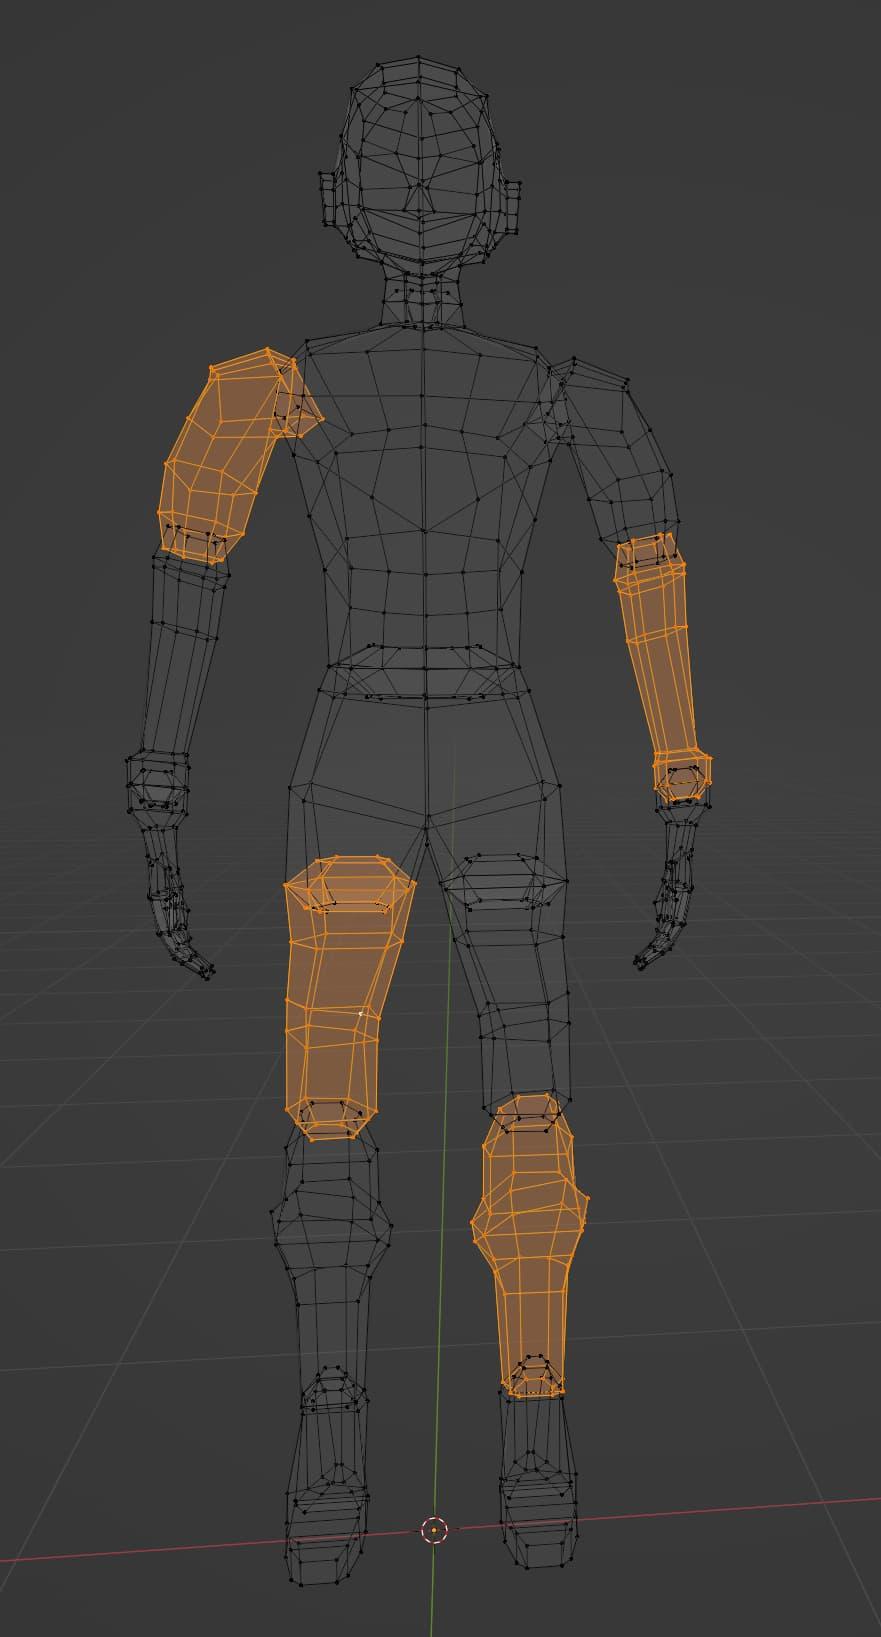 A screenshot of a wireframe of a low-poly character in Blender. Parts of the character's arms and legs have been highlighted, demonstrating how the character is composed of multiple individual parts